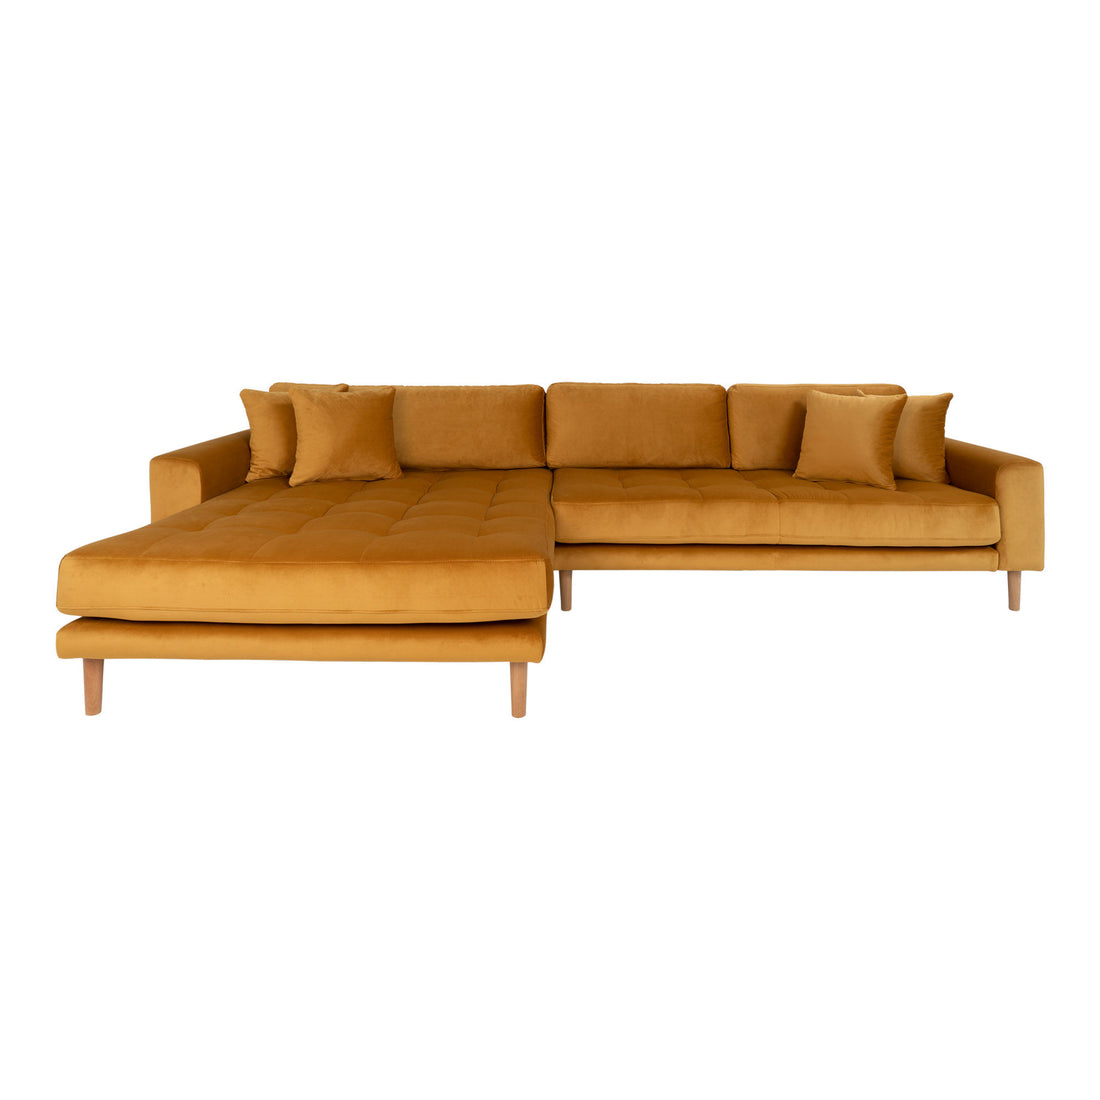 Lido Lounge Sofa - Lounge Sofa, Left In Velor, Sustaine Yellow with Four Pillows and Nature Wooden Ben, HN1004 - 1 - Pcs